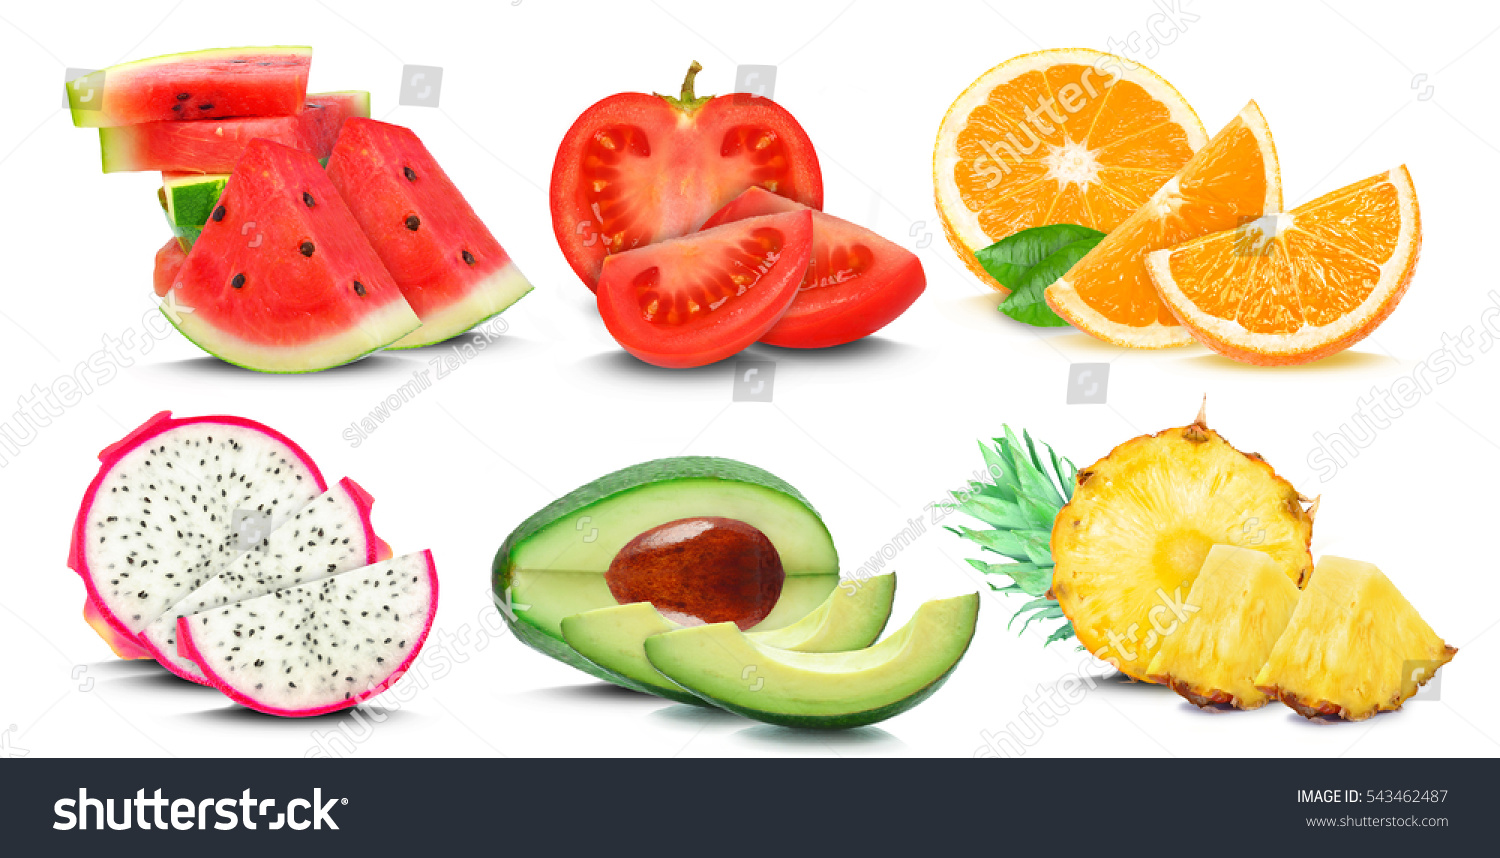 fruits and vegetables isolated on a white background #543462487